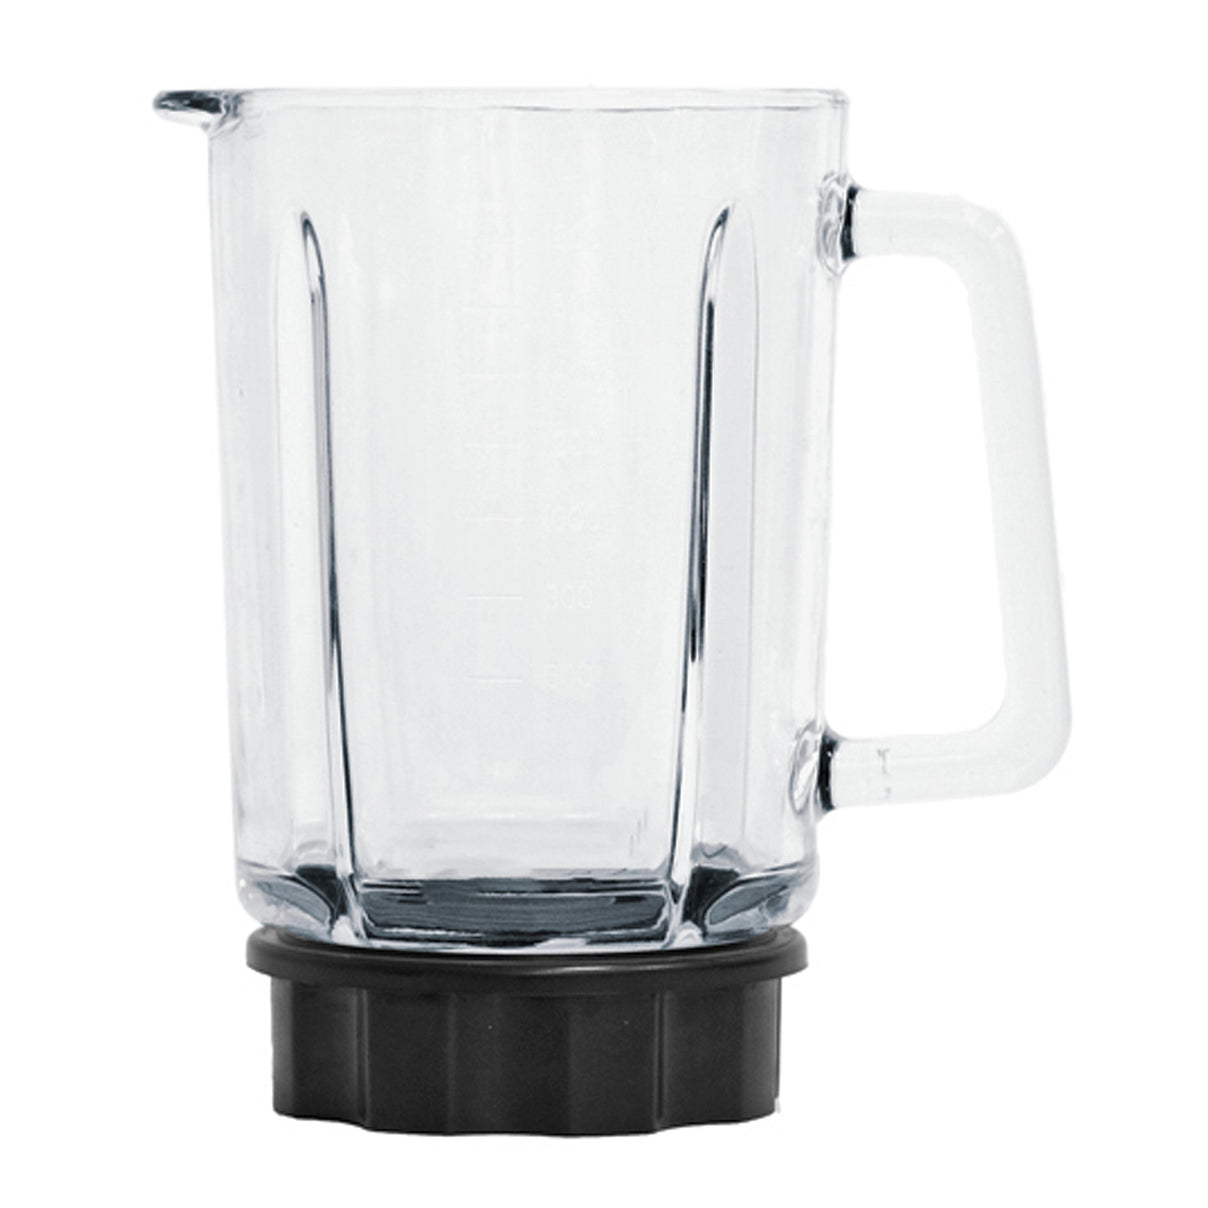 Tempered Glass Carafe/Pitcher